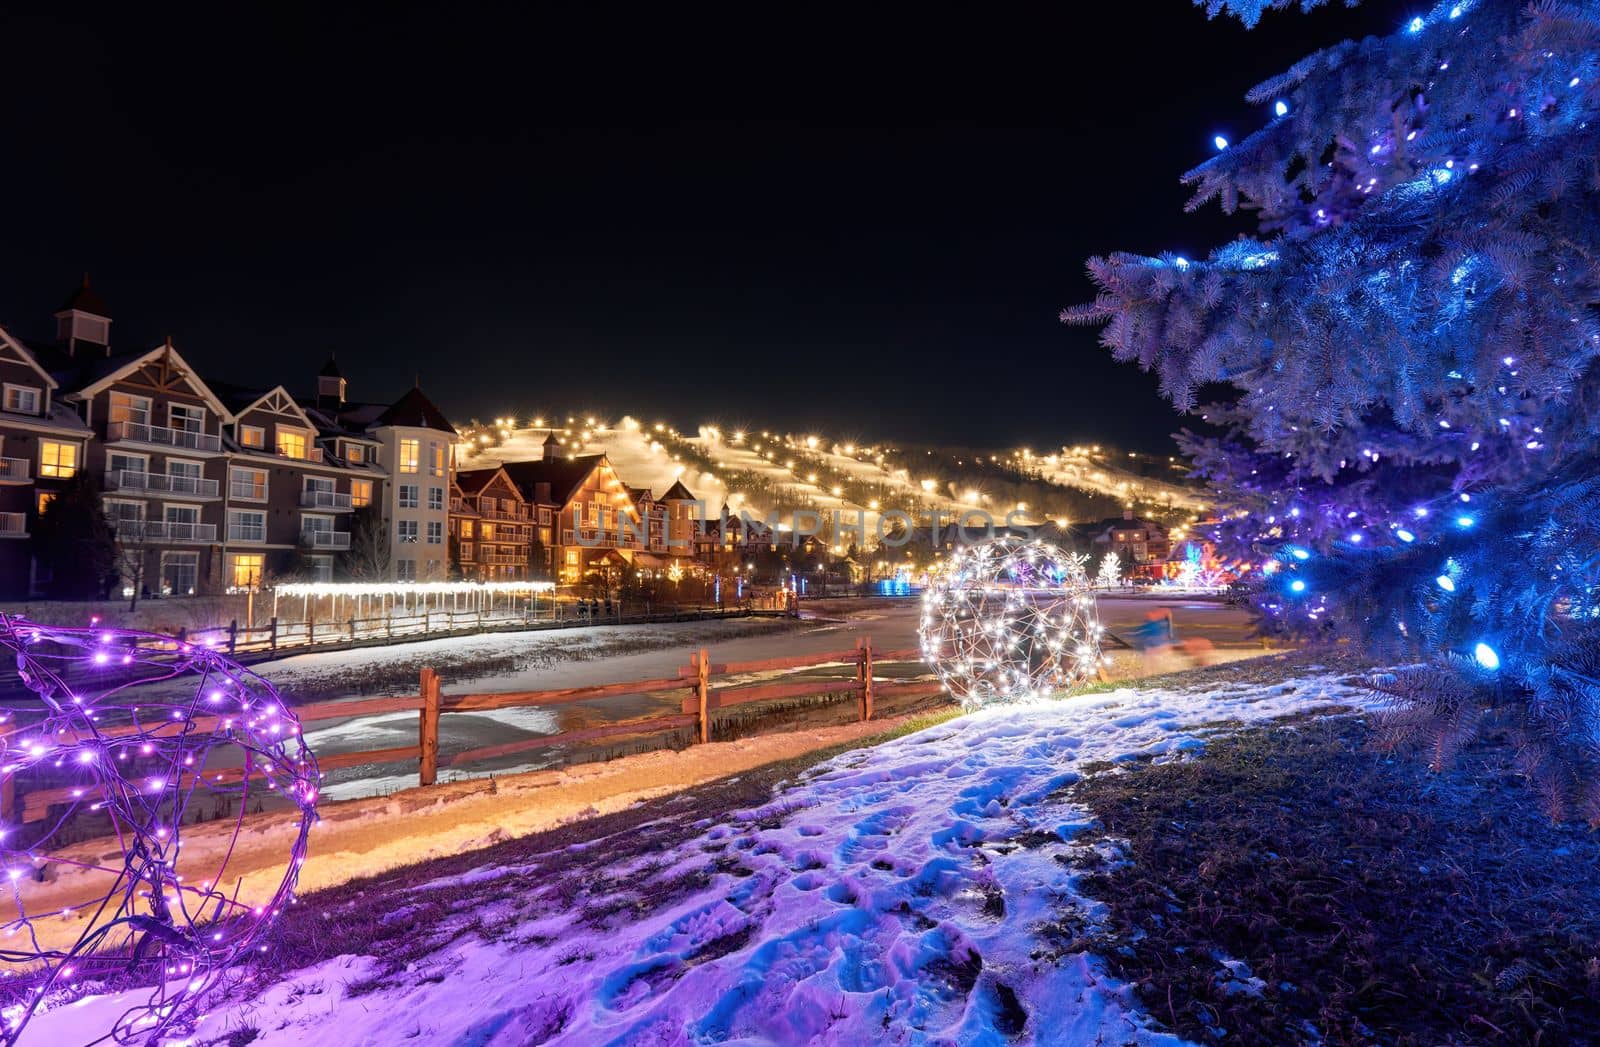 Blue Mountain Village in winter Lit up with Christmas Lights at Night. High quality photo